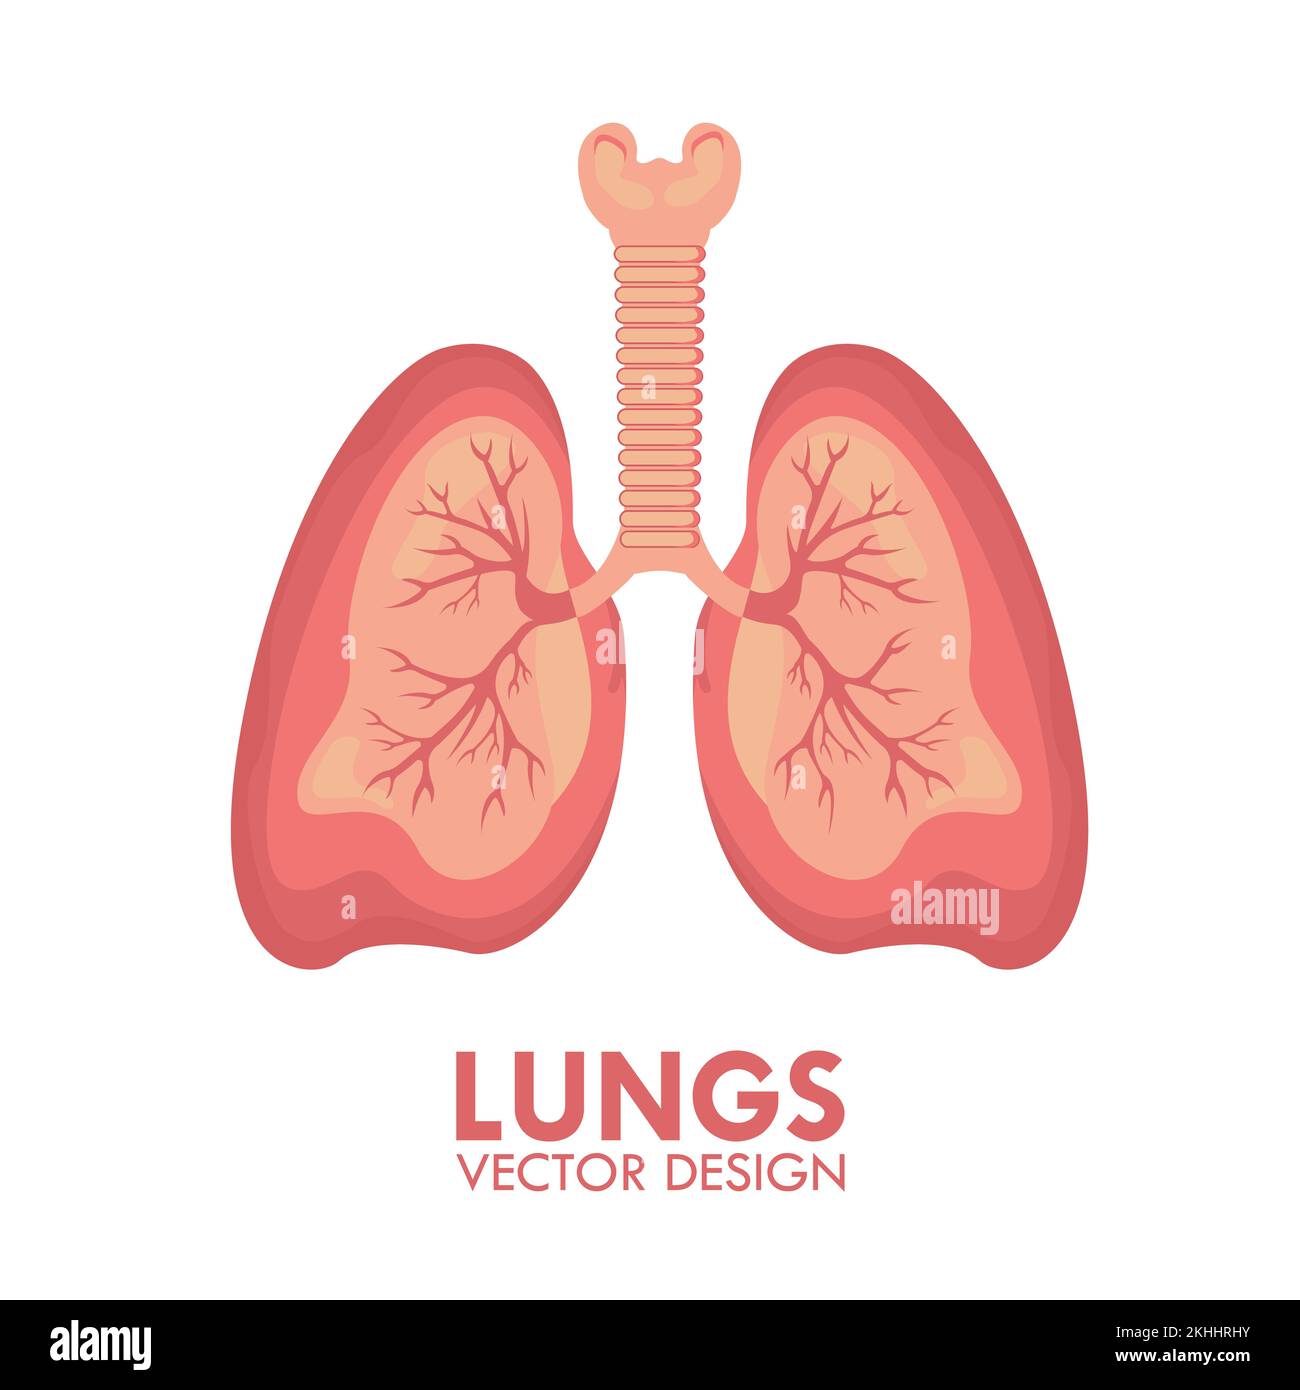 Lungs Human Respiratory Organ Medical Healthcare Isolated Vector Illustration Stock Vector